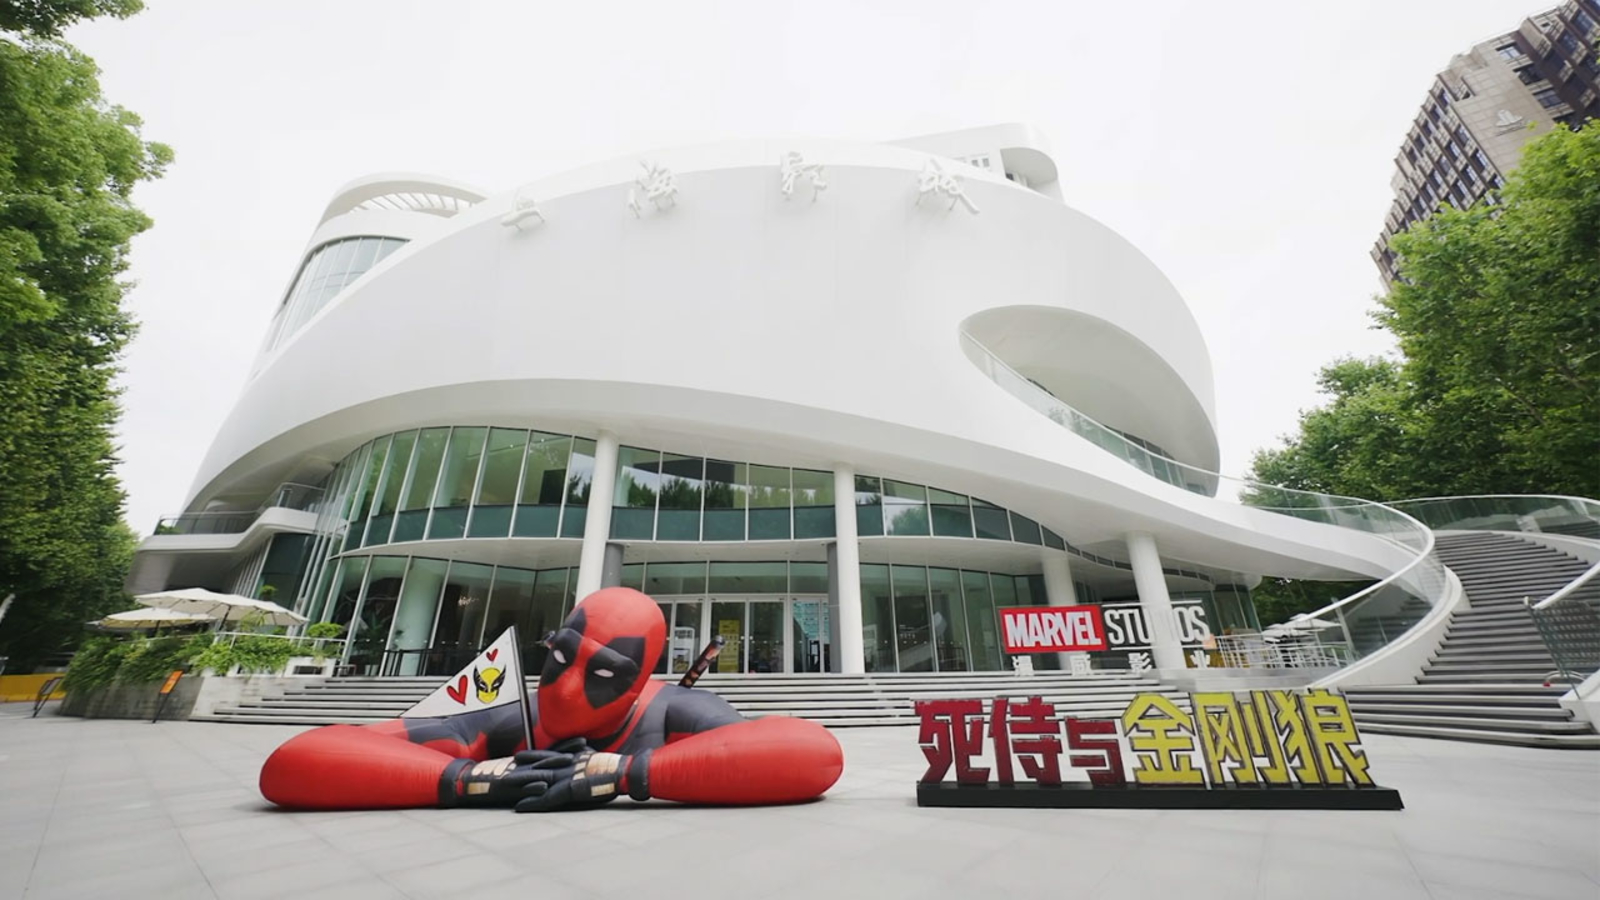 ‘Deadpool & Wolverine’ kicks off global press tour with stops in Asia [Video]